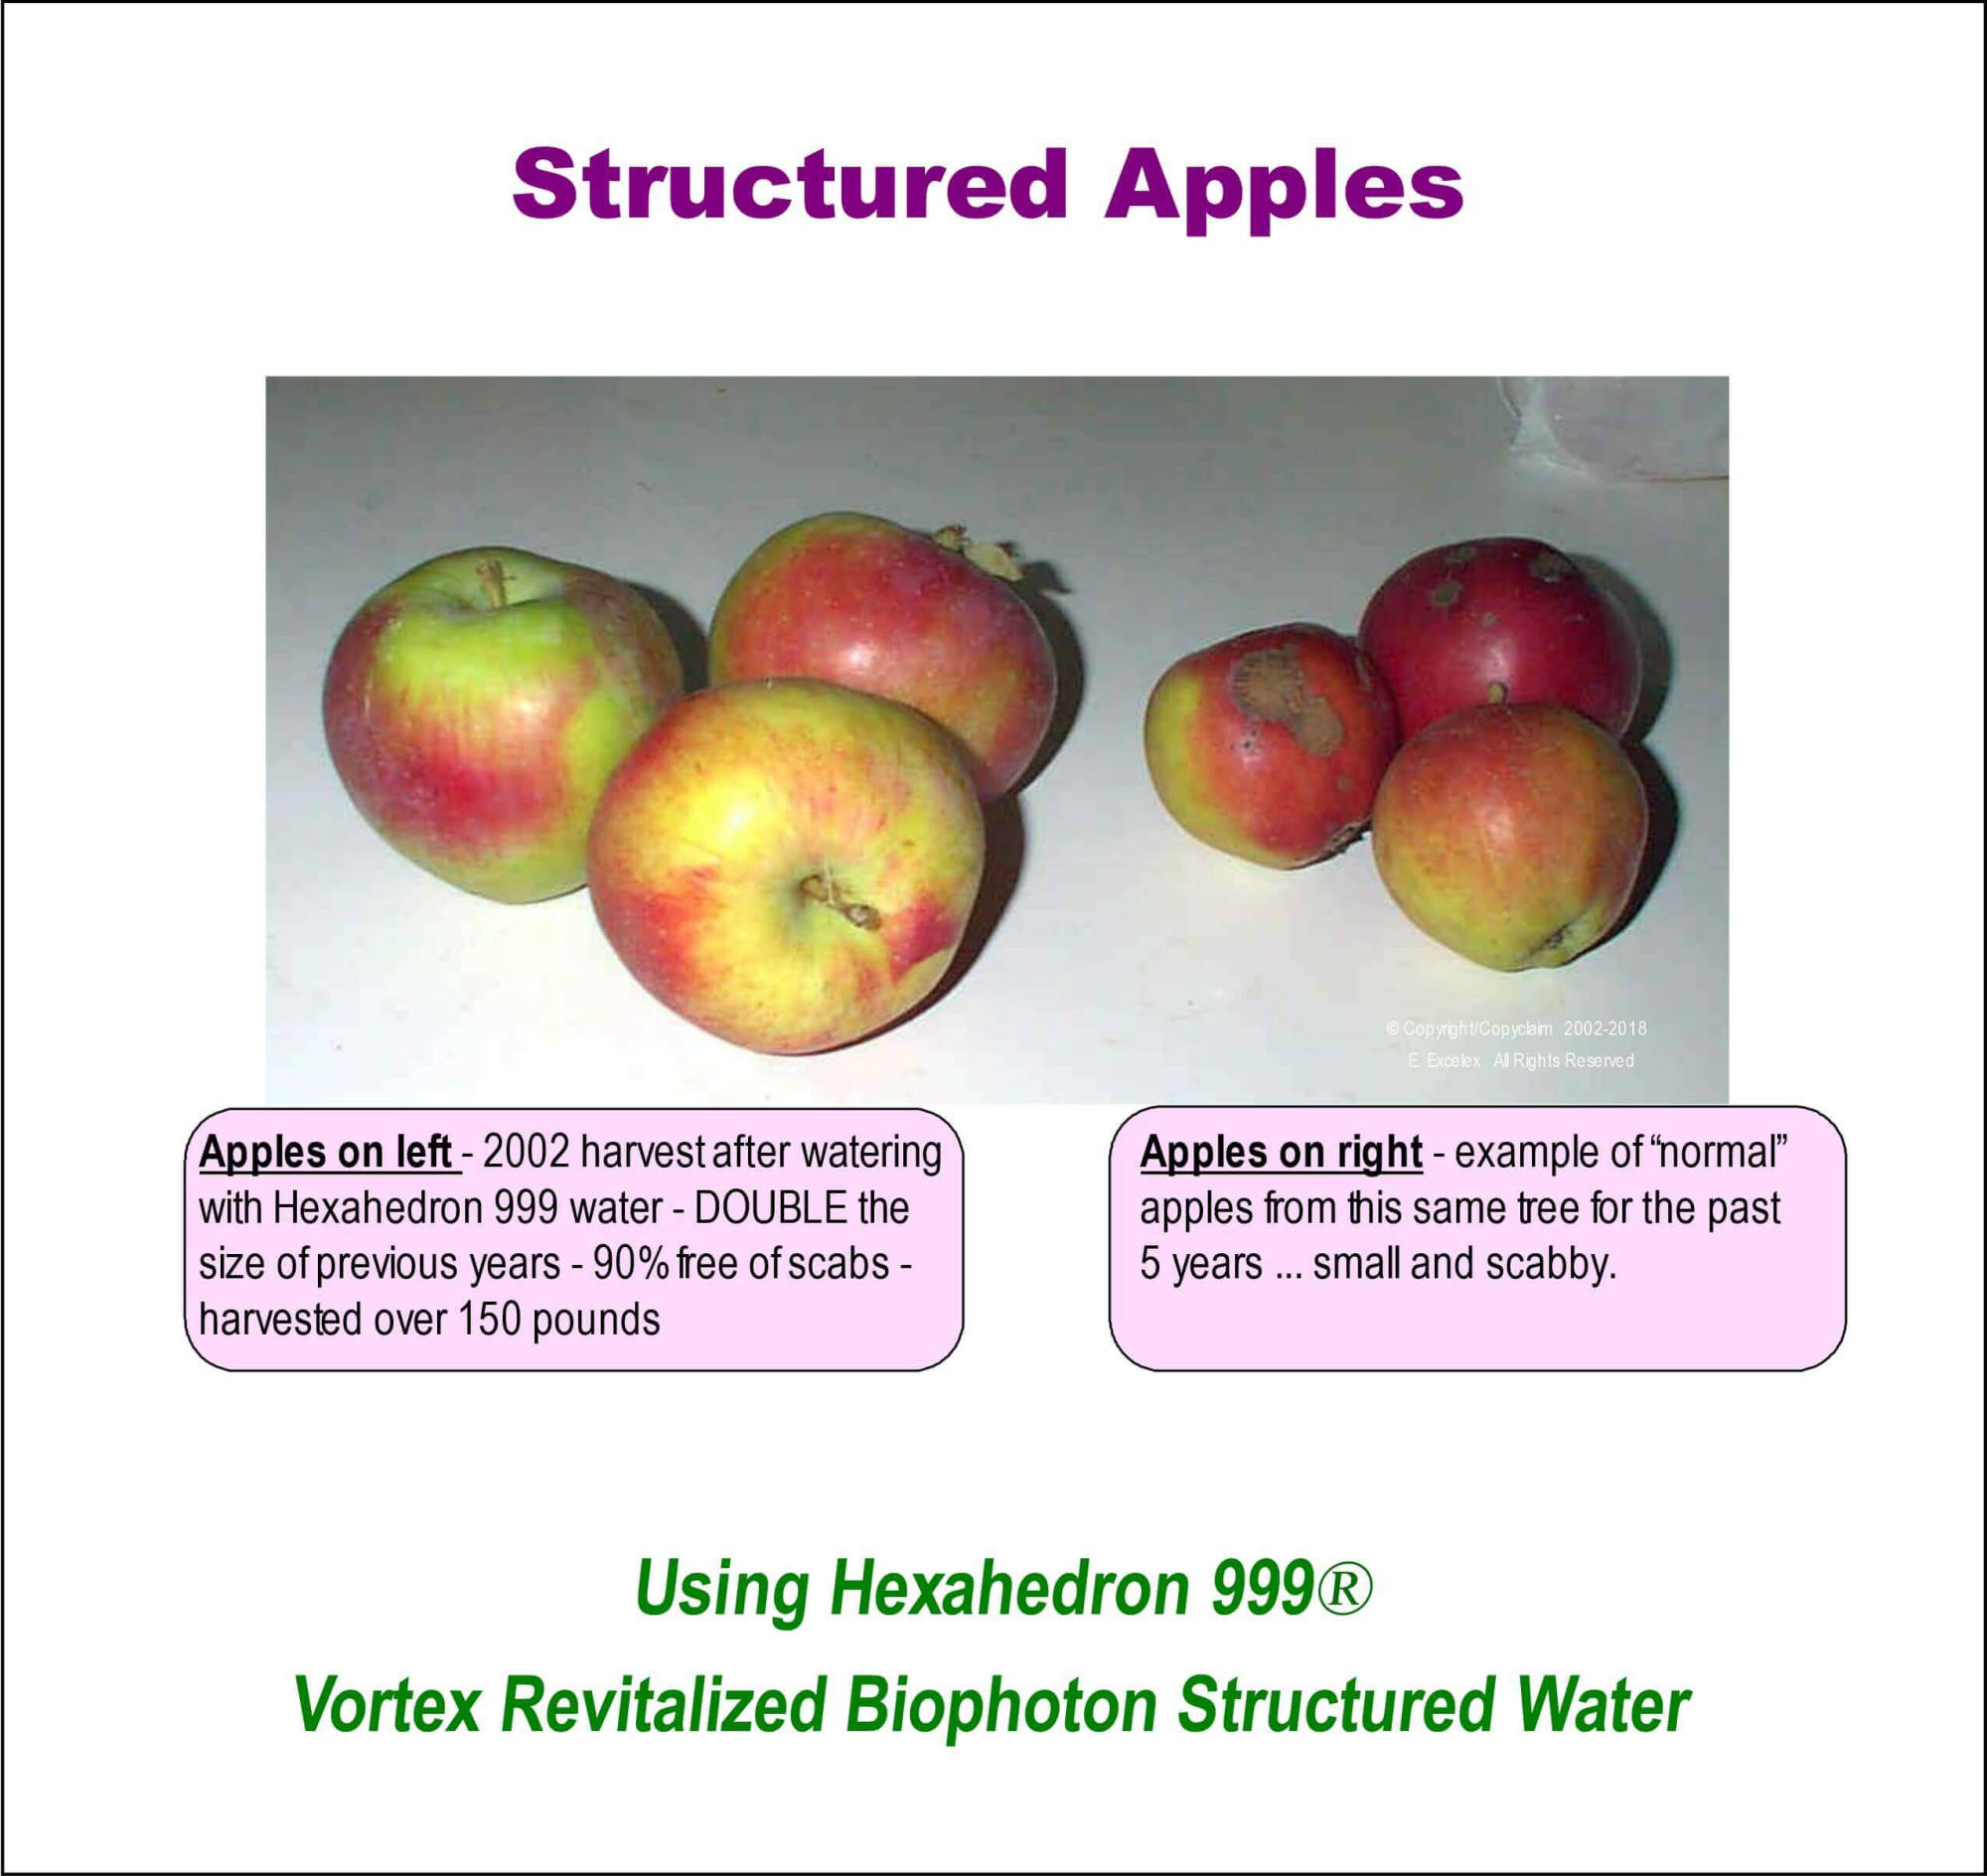 Structured Apples using Hexahedron 999 Vortex Revitalized Structured Biophoton Water